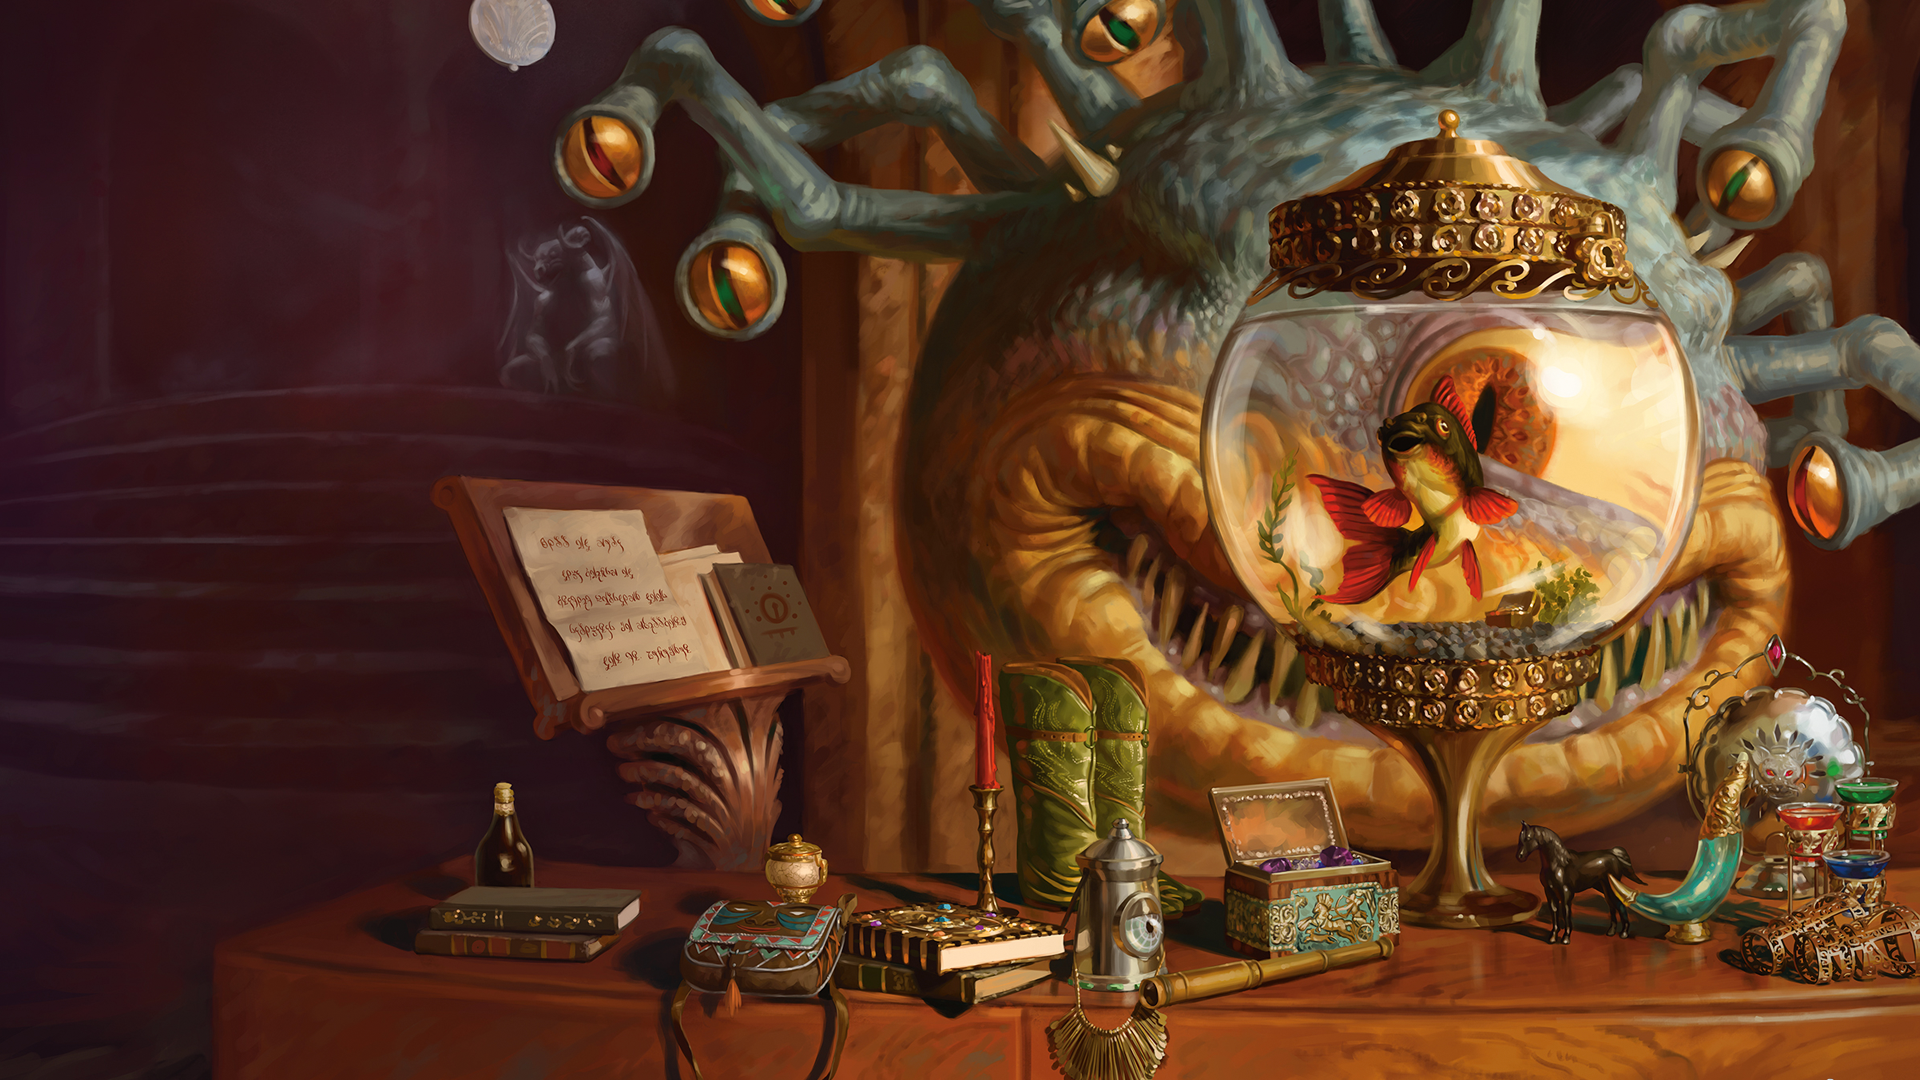 Xanathar’s Guide to Everything